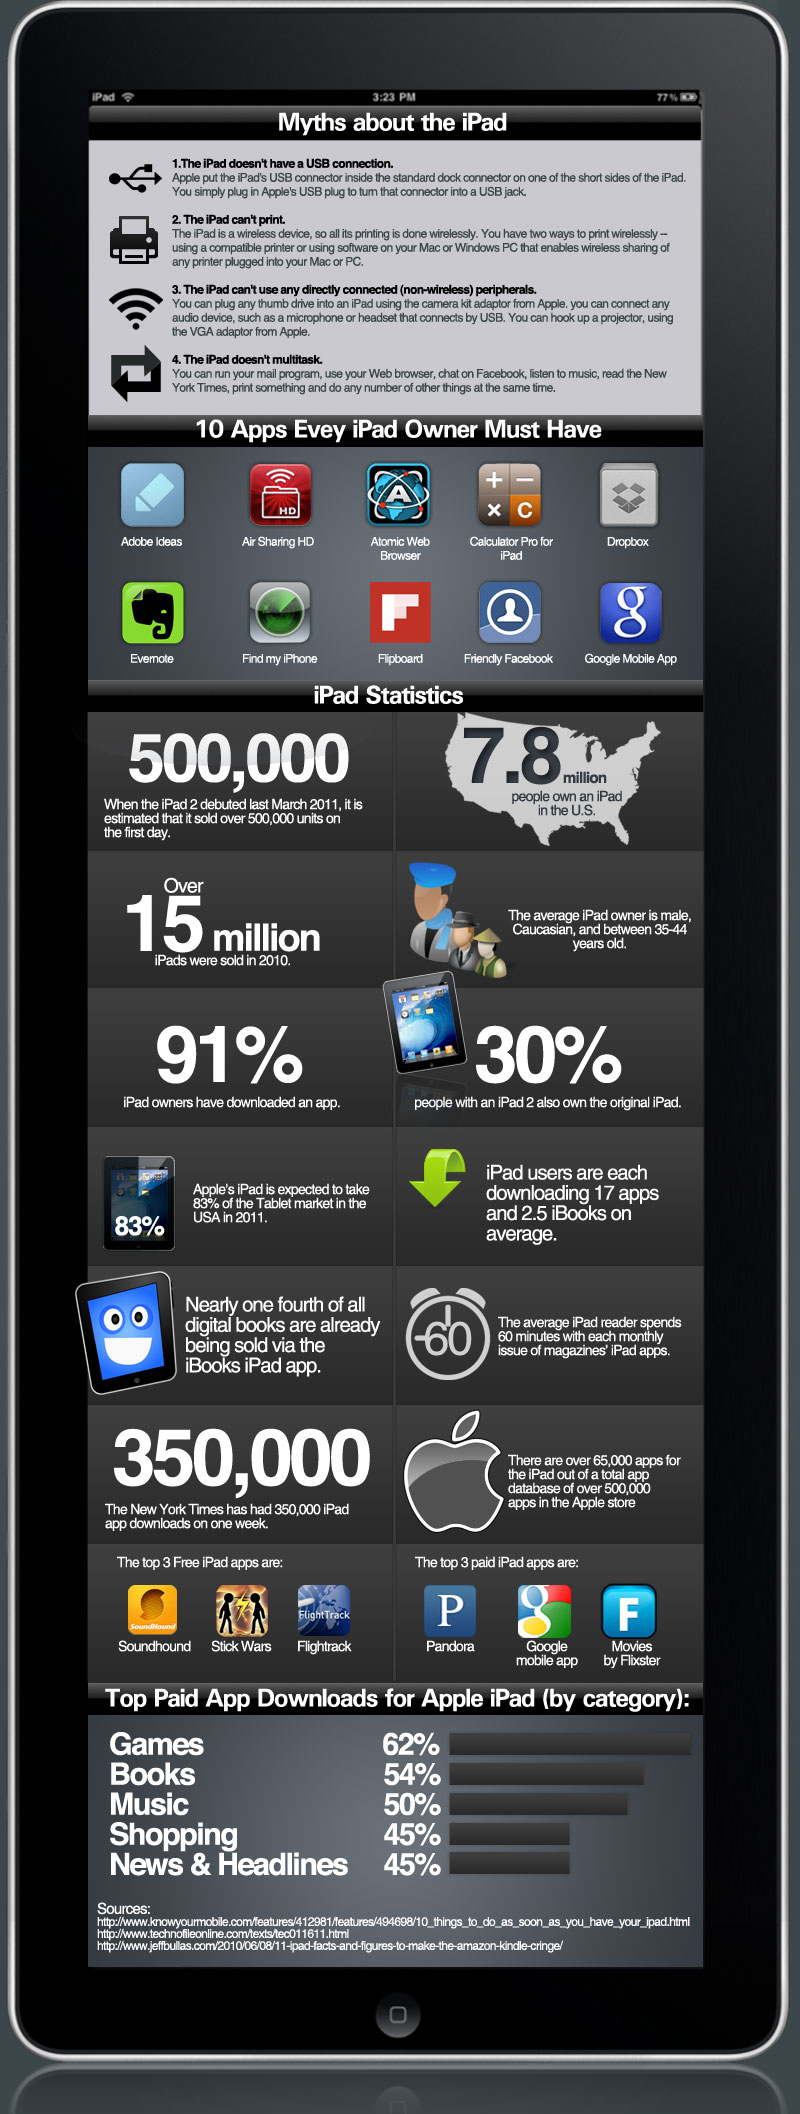 Myths About The iPad Infographic